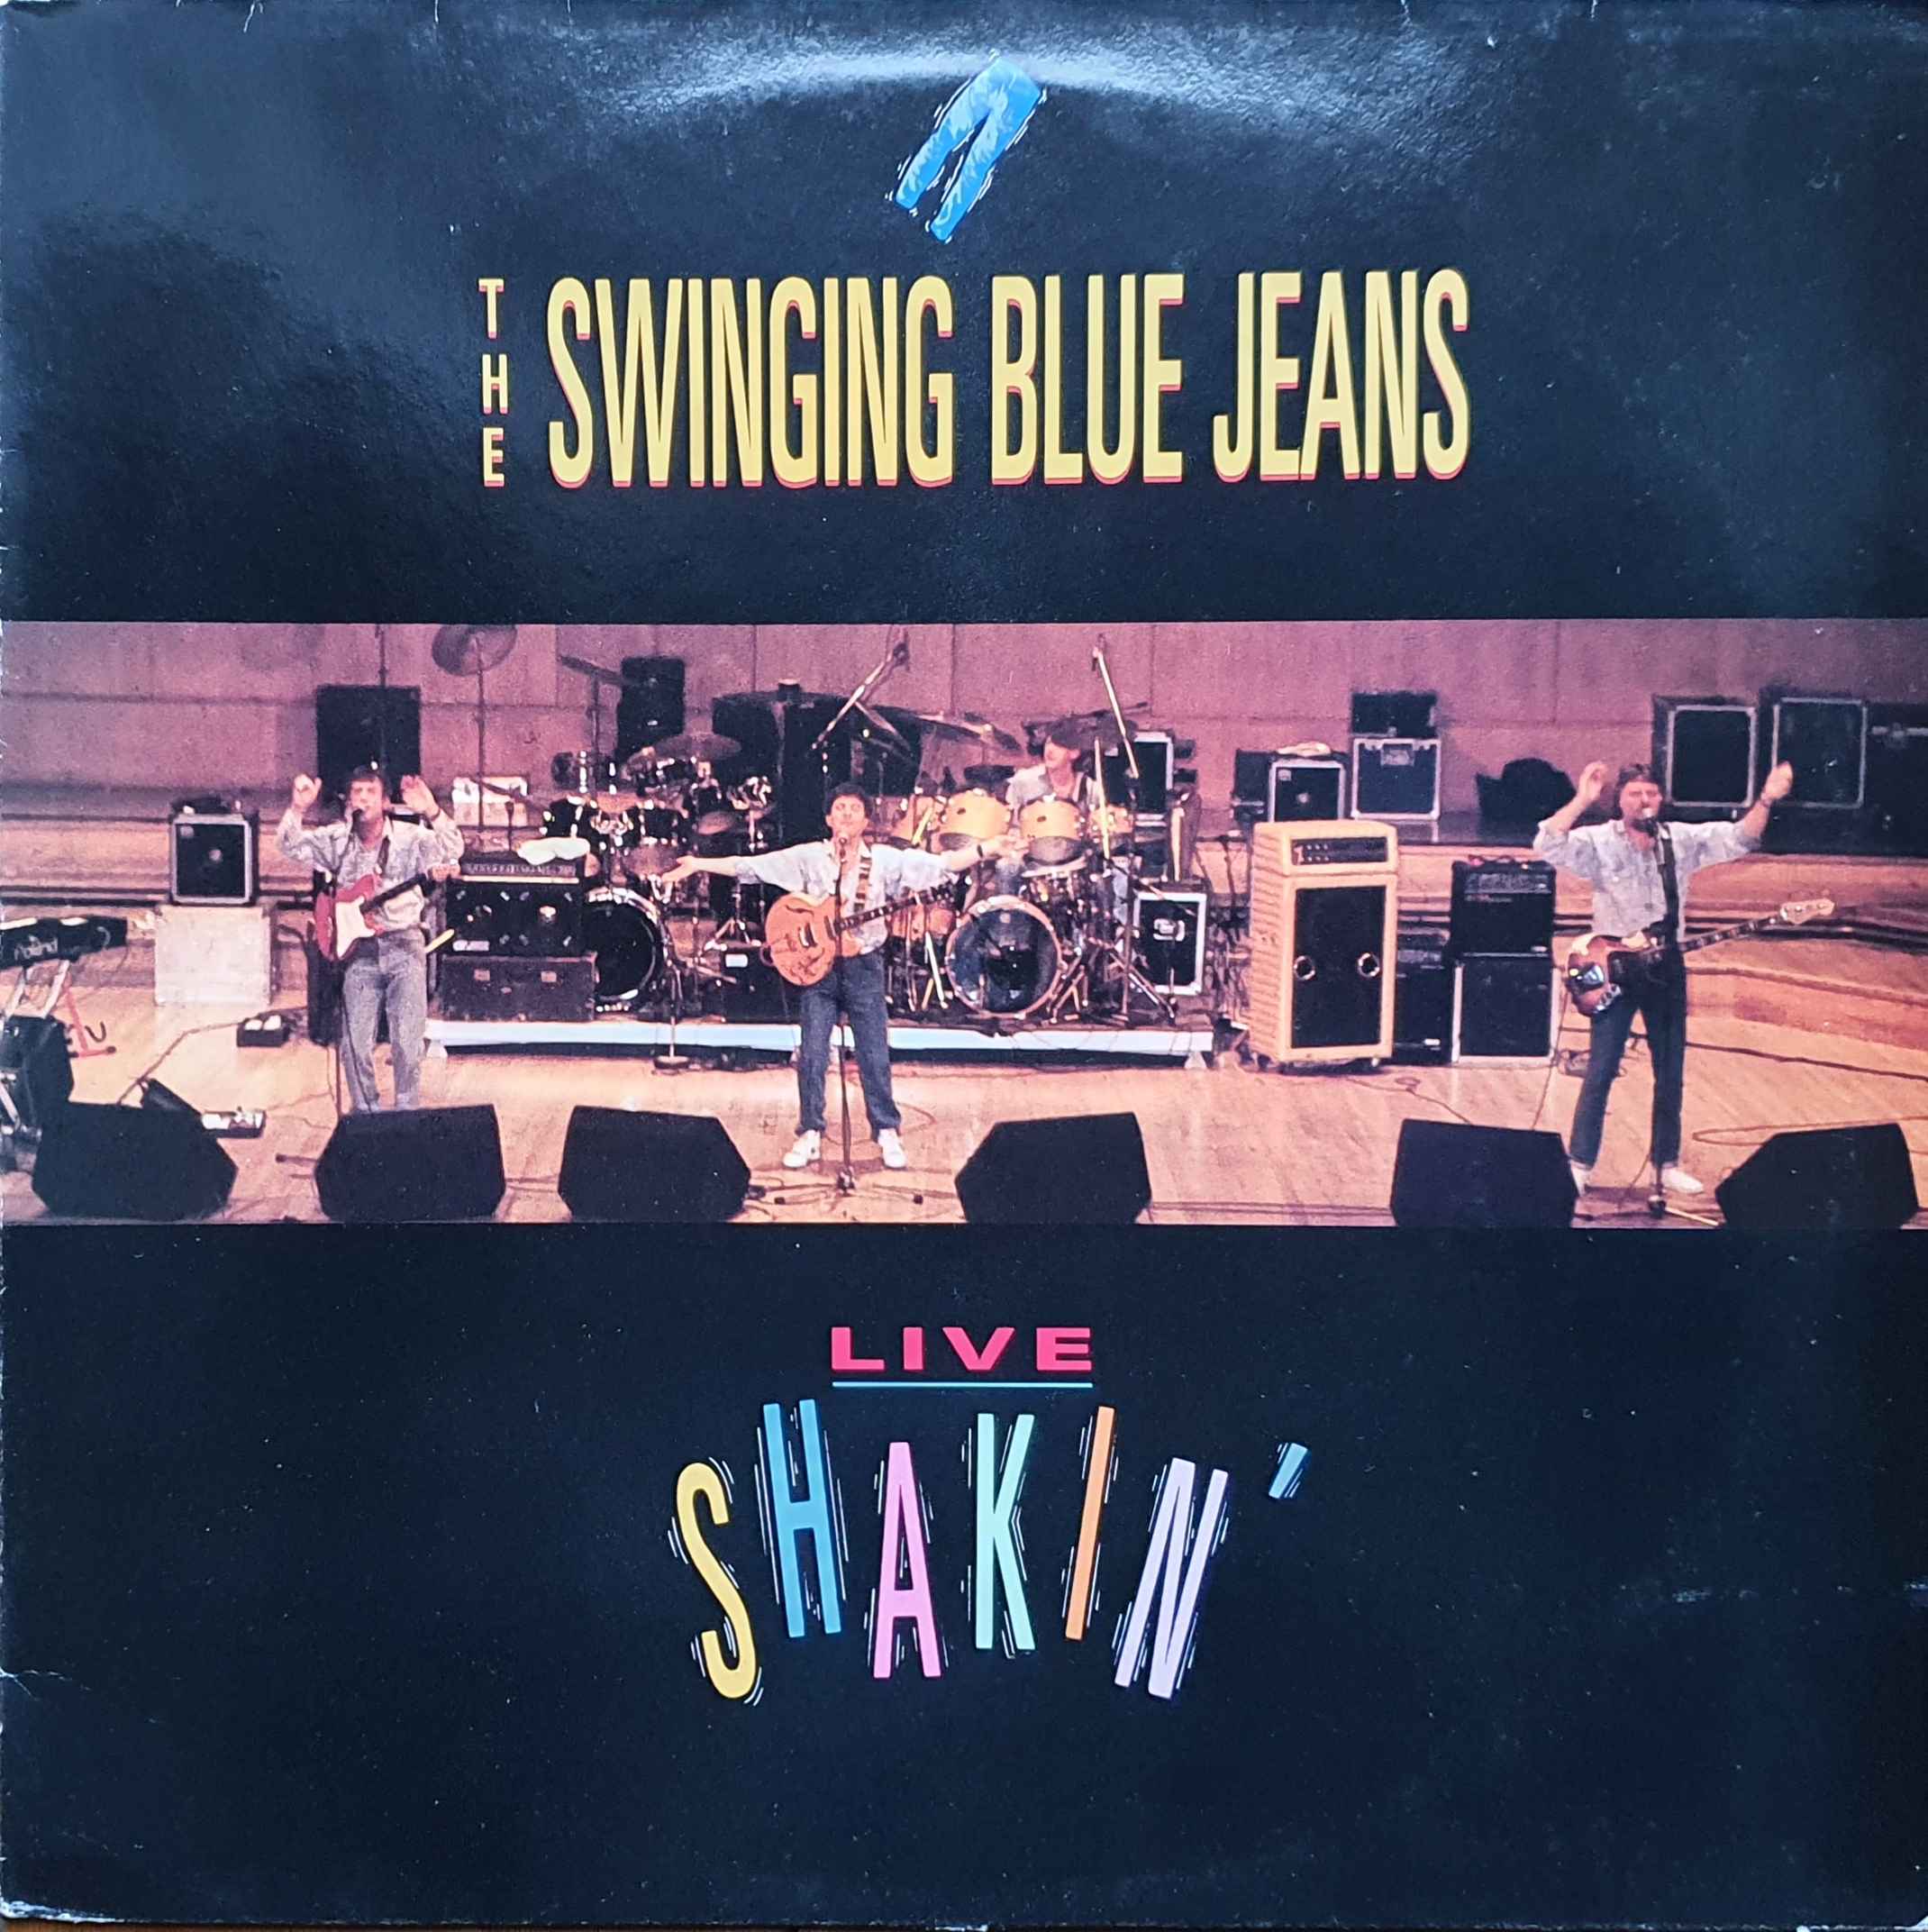 Picture of Live shakin' by artist Swinging Blue Jeans from the BBC albums - Records and Tapes library